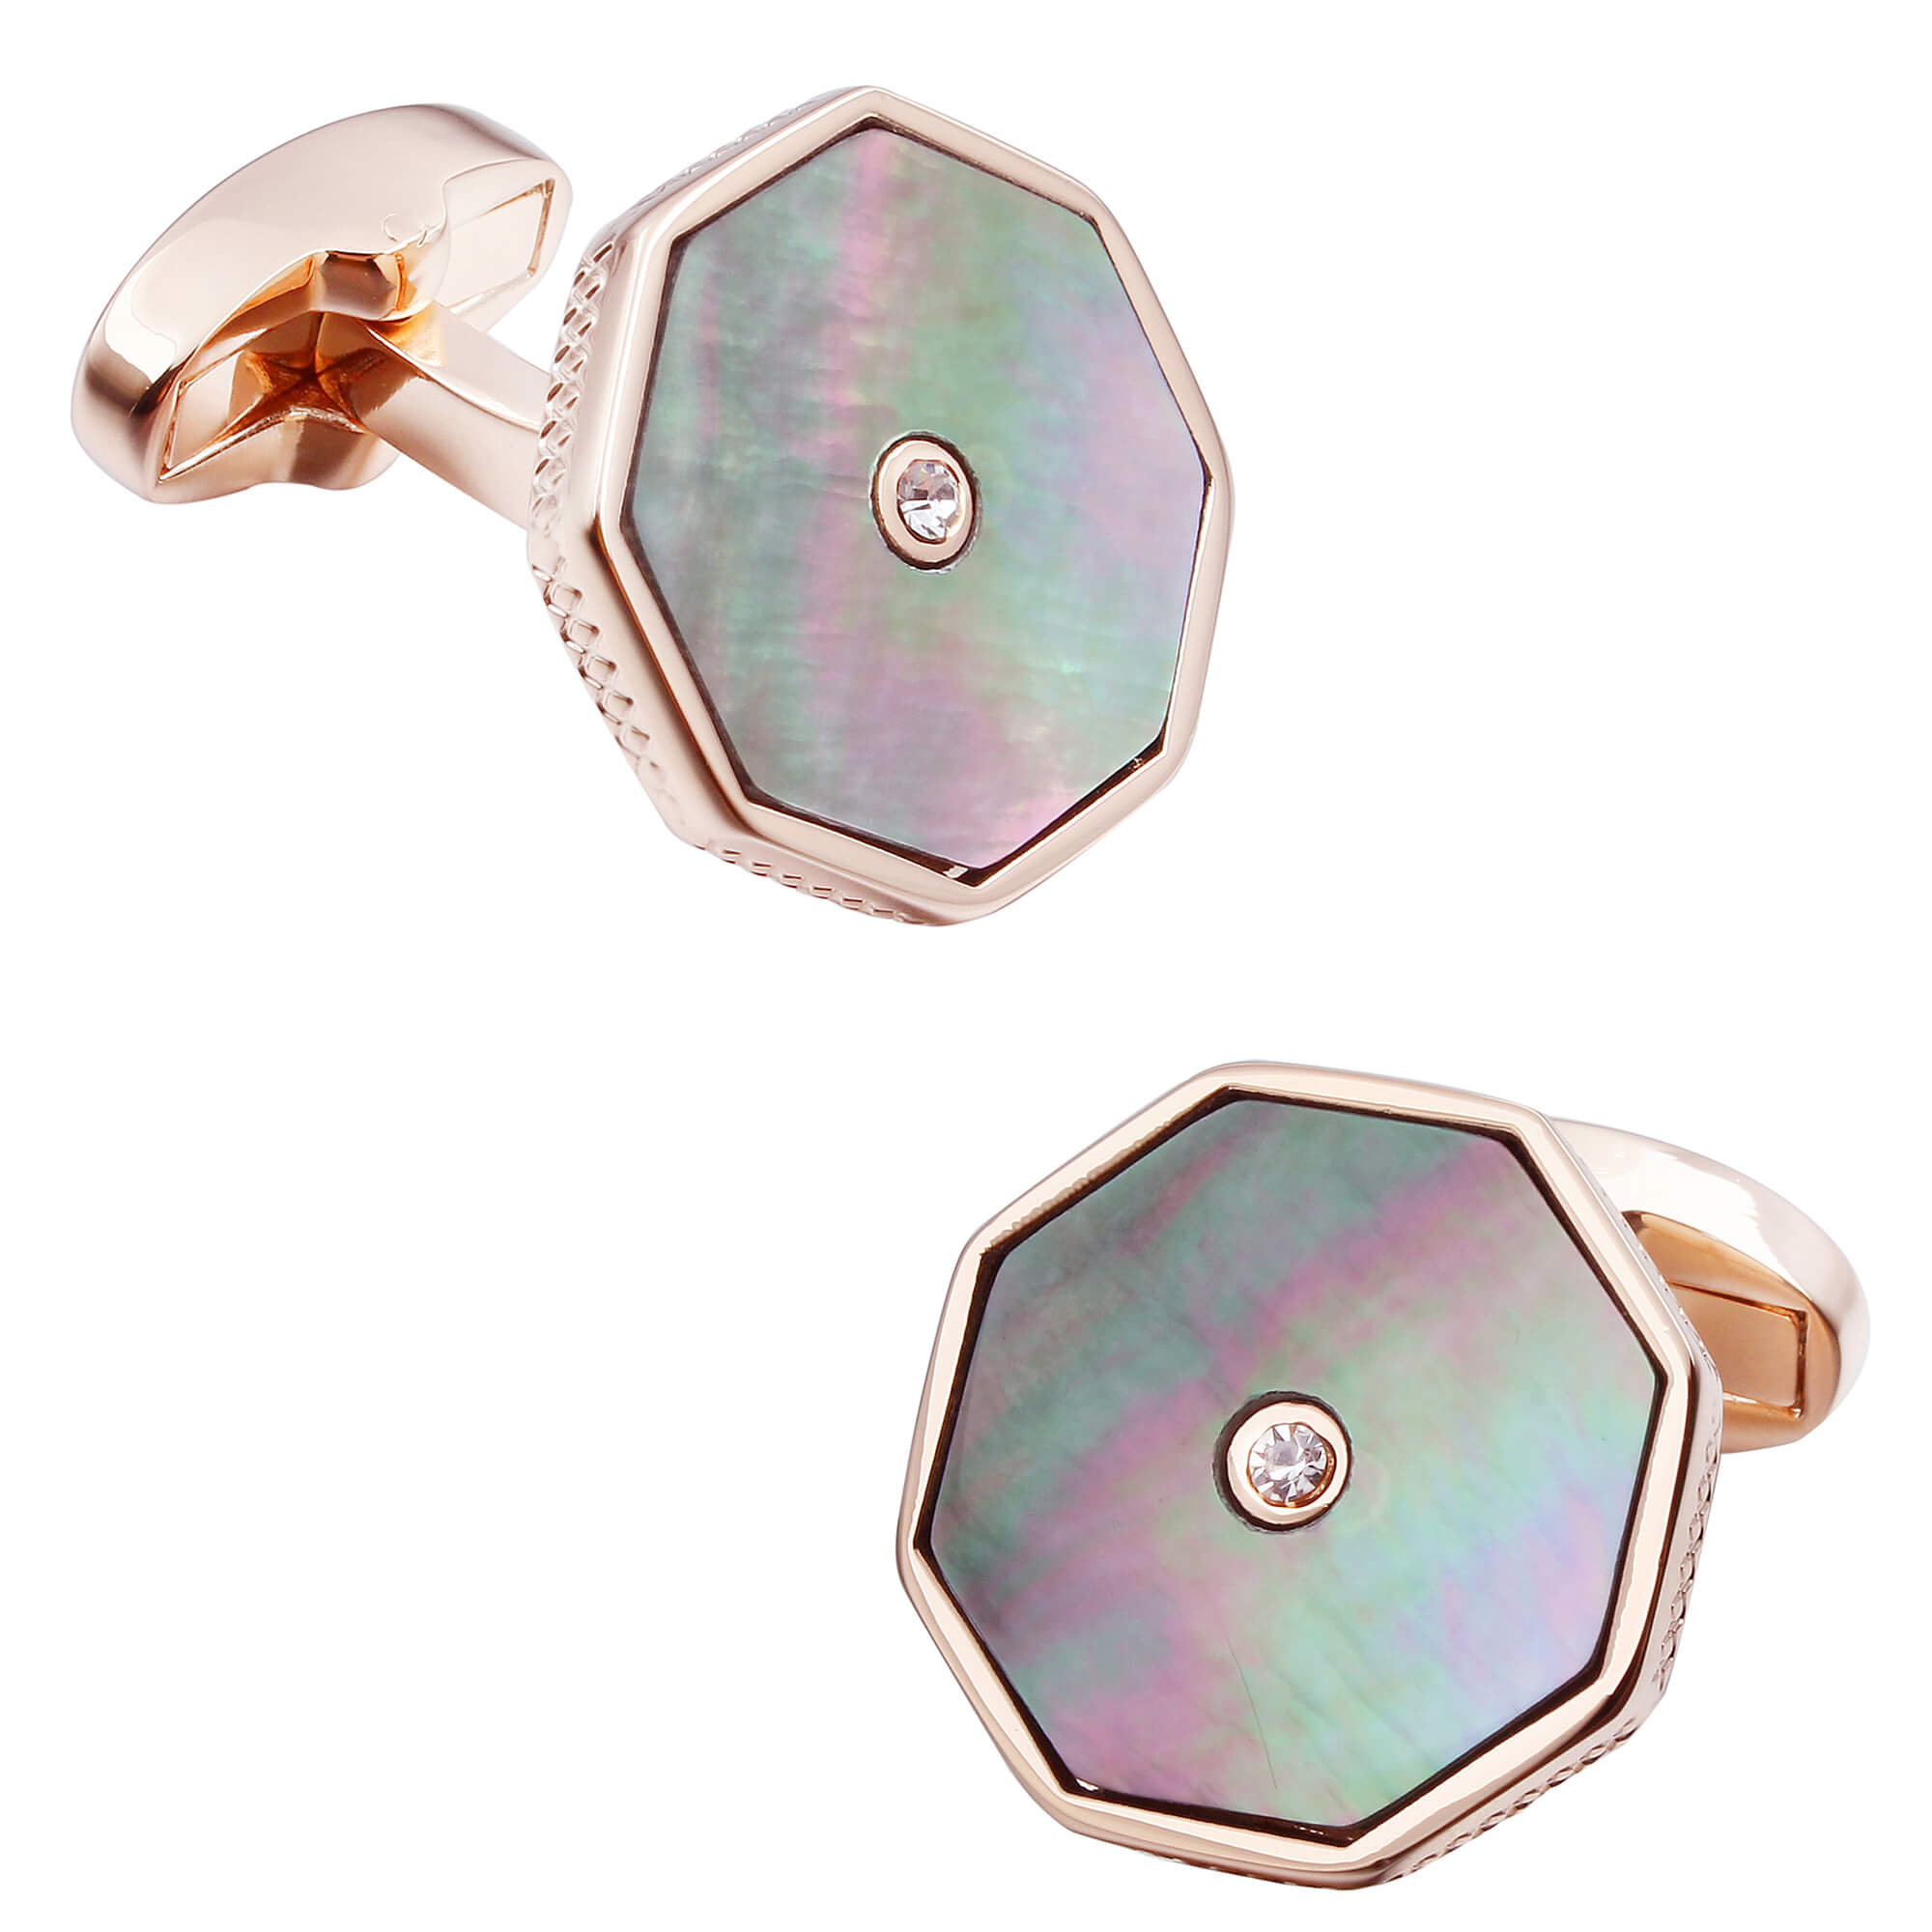 Black Mother of Pearl with Crystal in Rose Gold Cufflinks